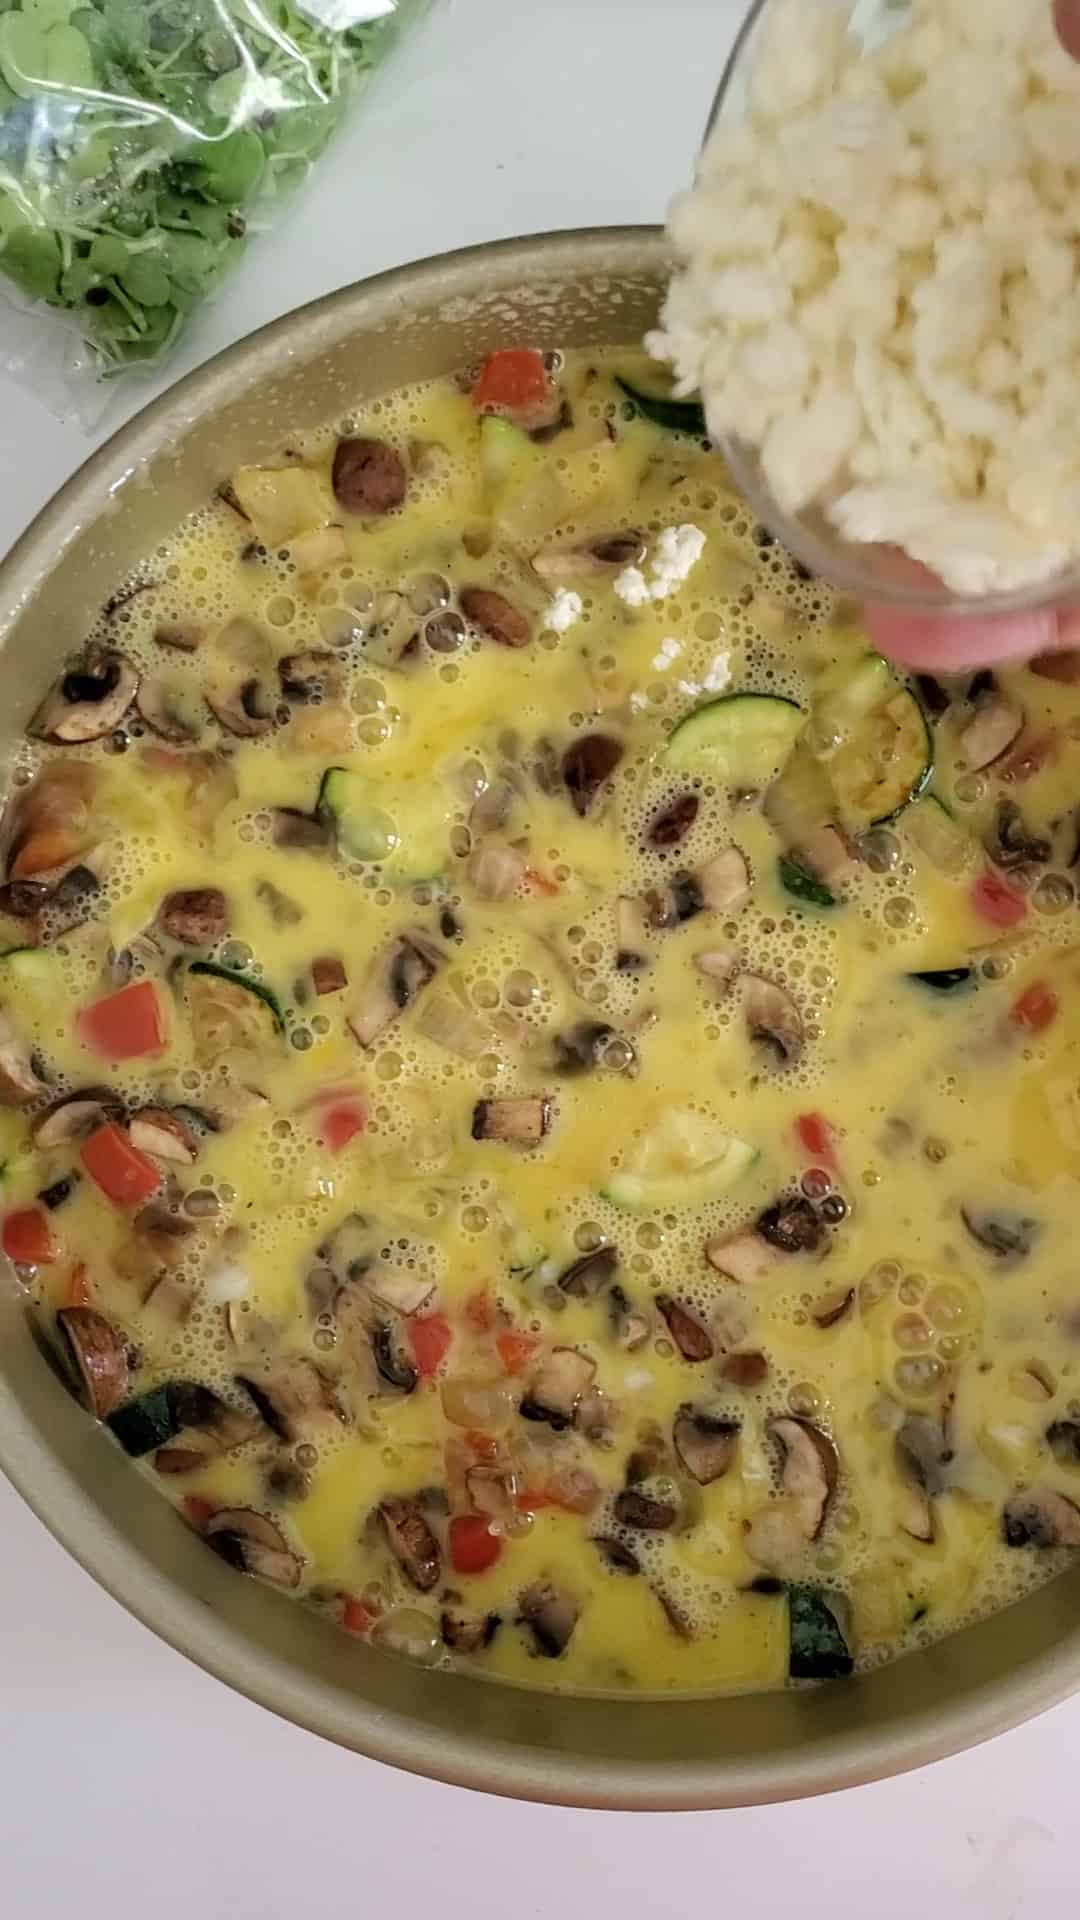 sprinkling cheese over uncooked frittata